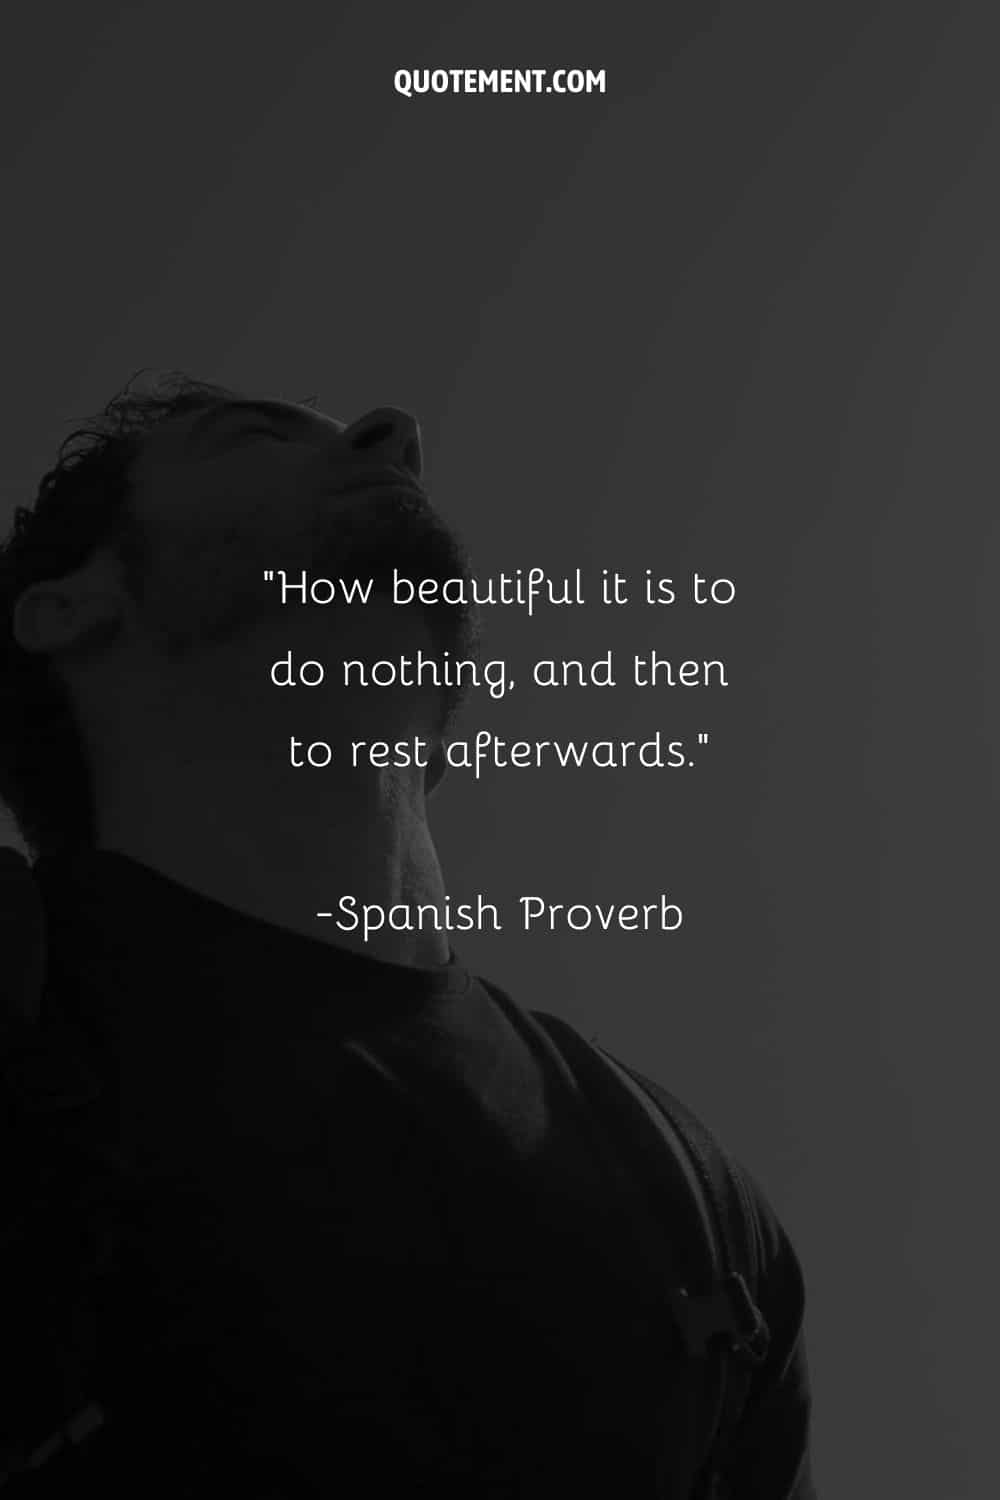 Image of a calm gentleman with closed eyes representing a quote about resting.